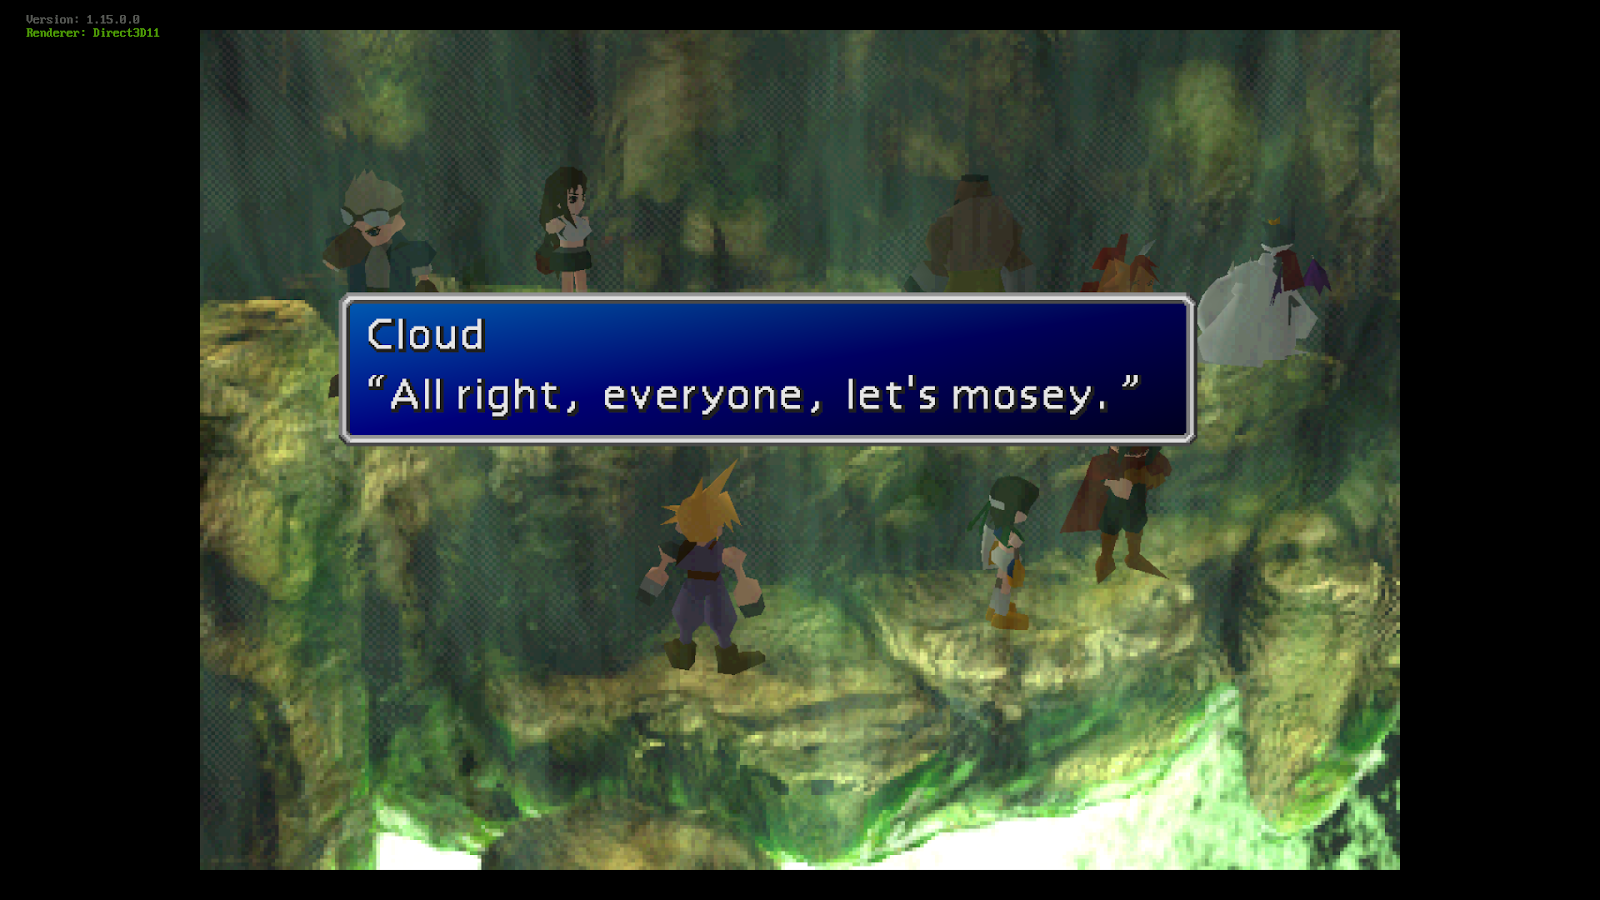 Final Fantasy 7 Rebirth reaffirms itself as my most-anticipated JRPG by  keeping me guessing